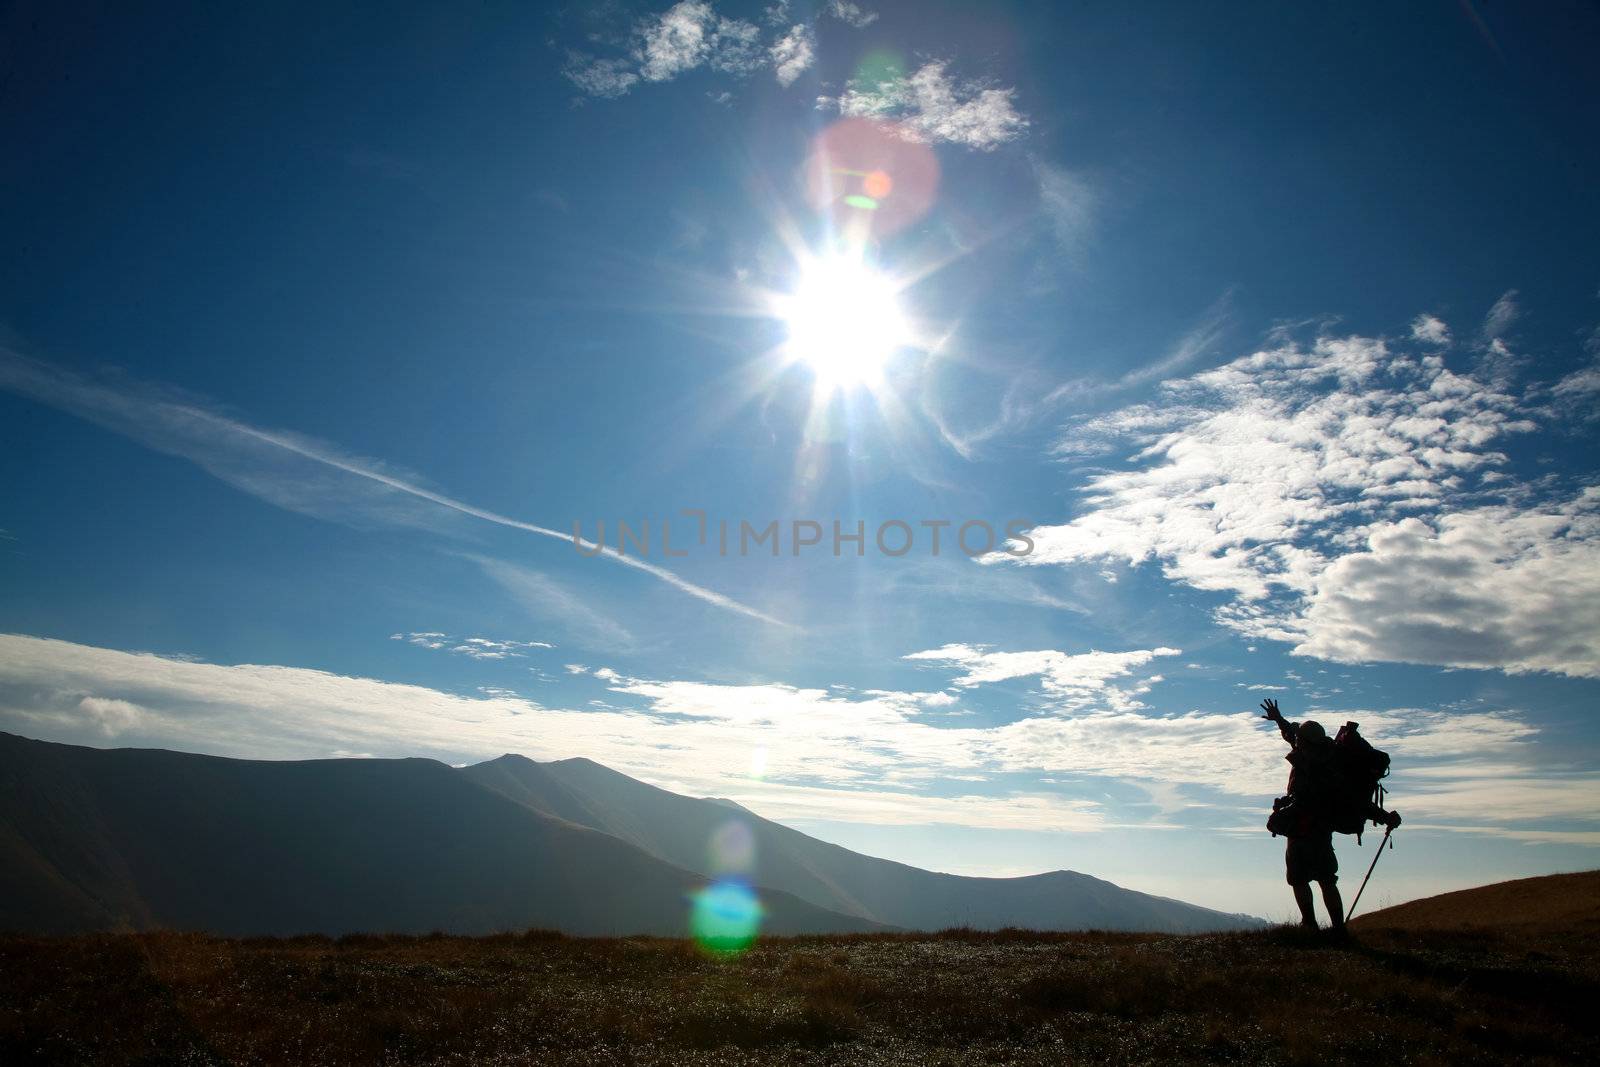 An image of silhouette of man on a hill